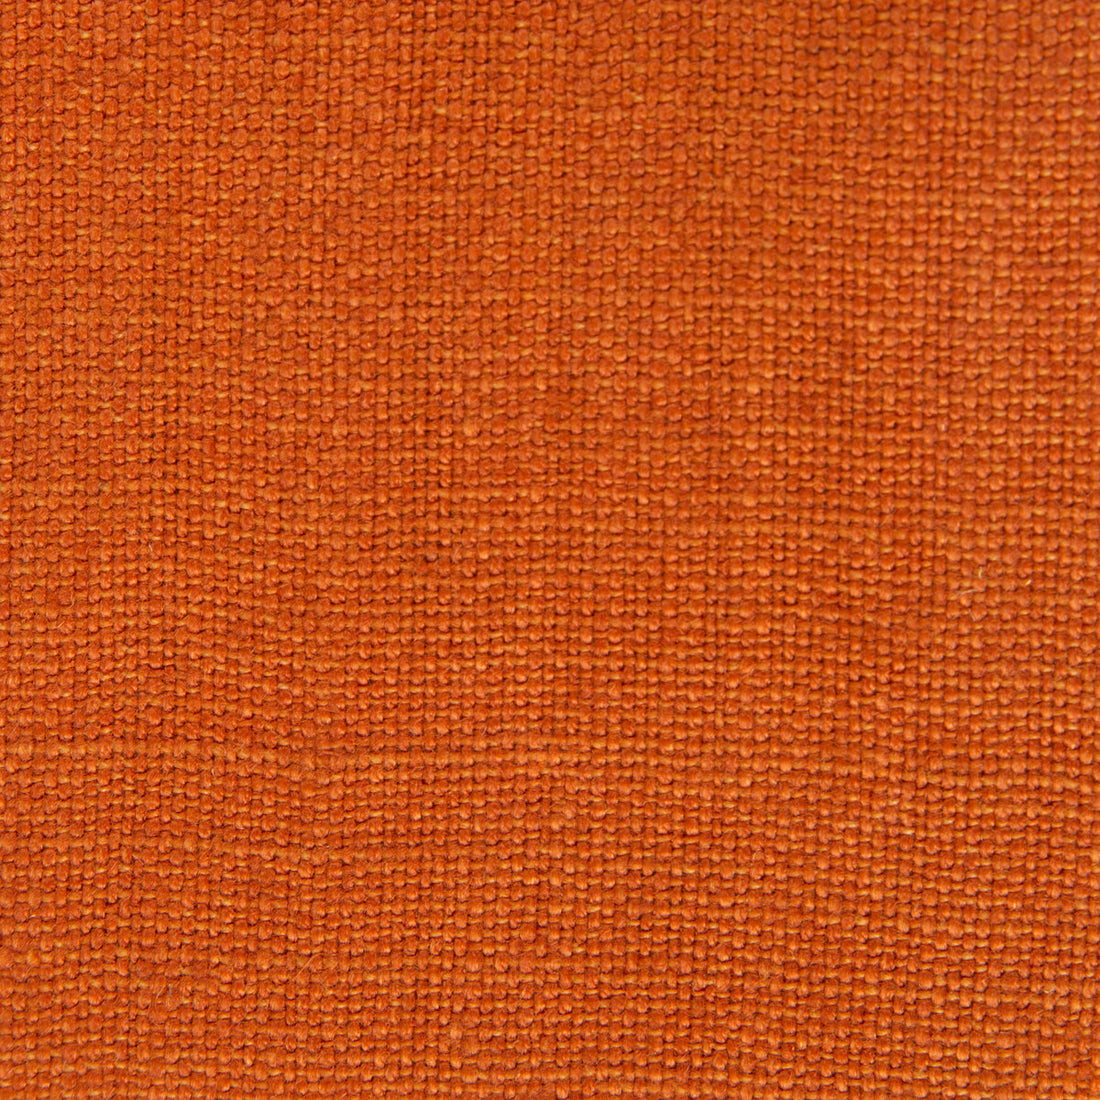 Nicaragua fabric in naranja color - pattern GDT5239.009.0 - by Gaston y Daniela in the Basics collection